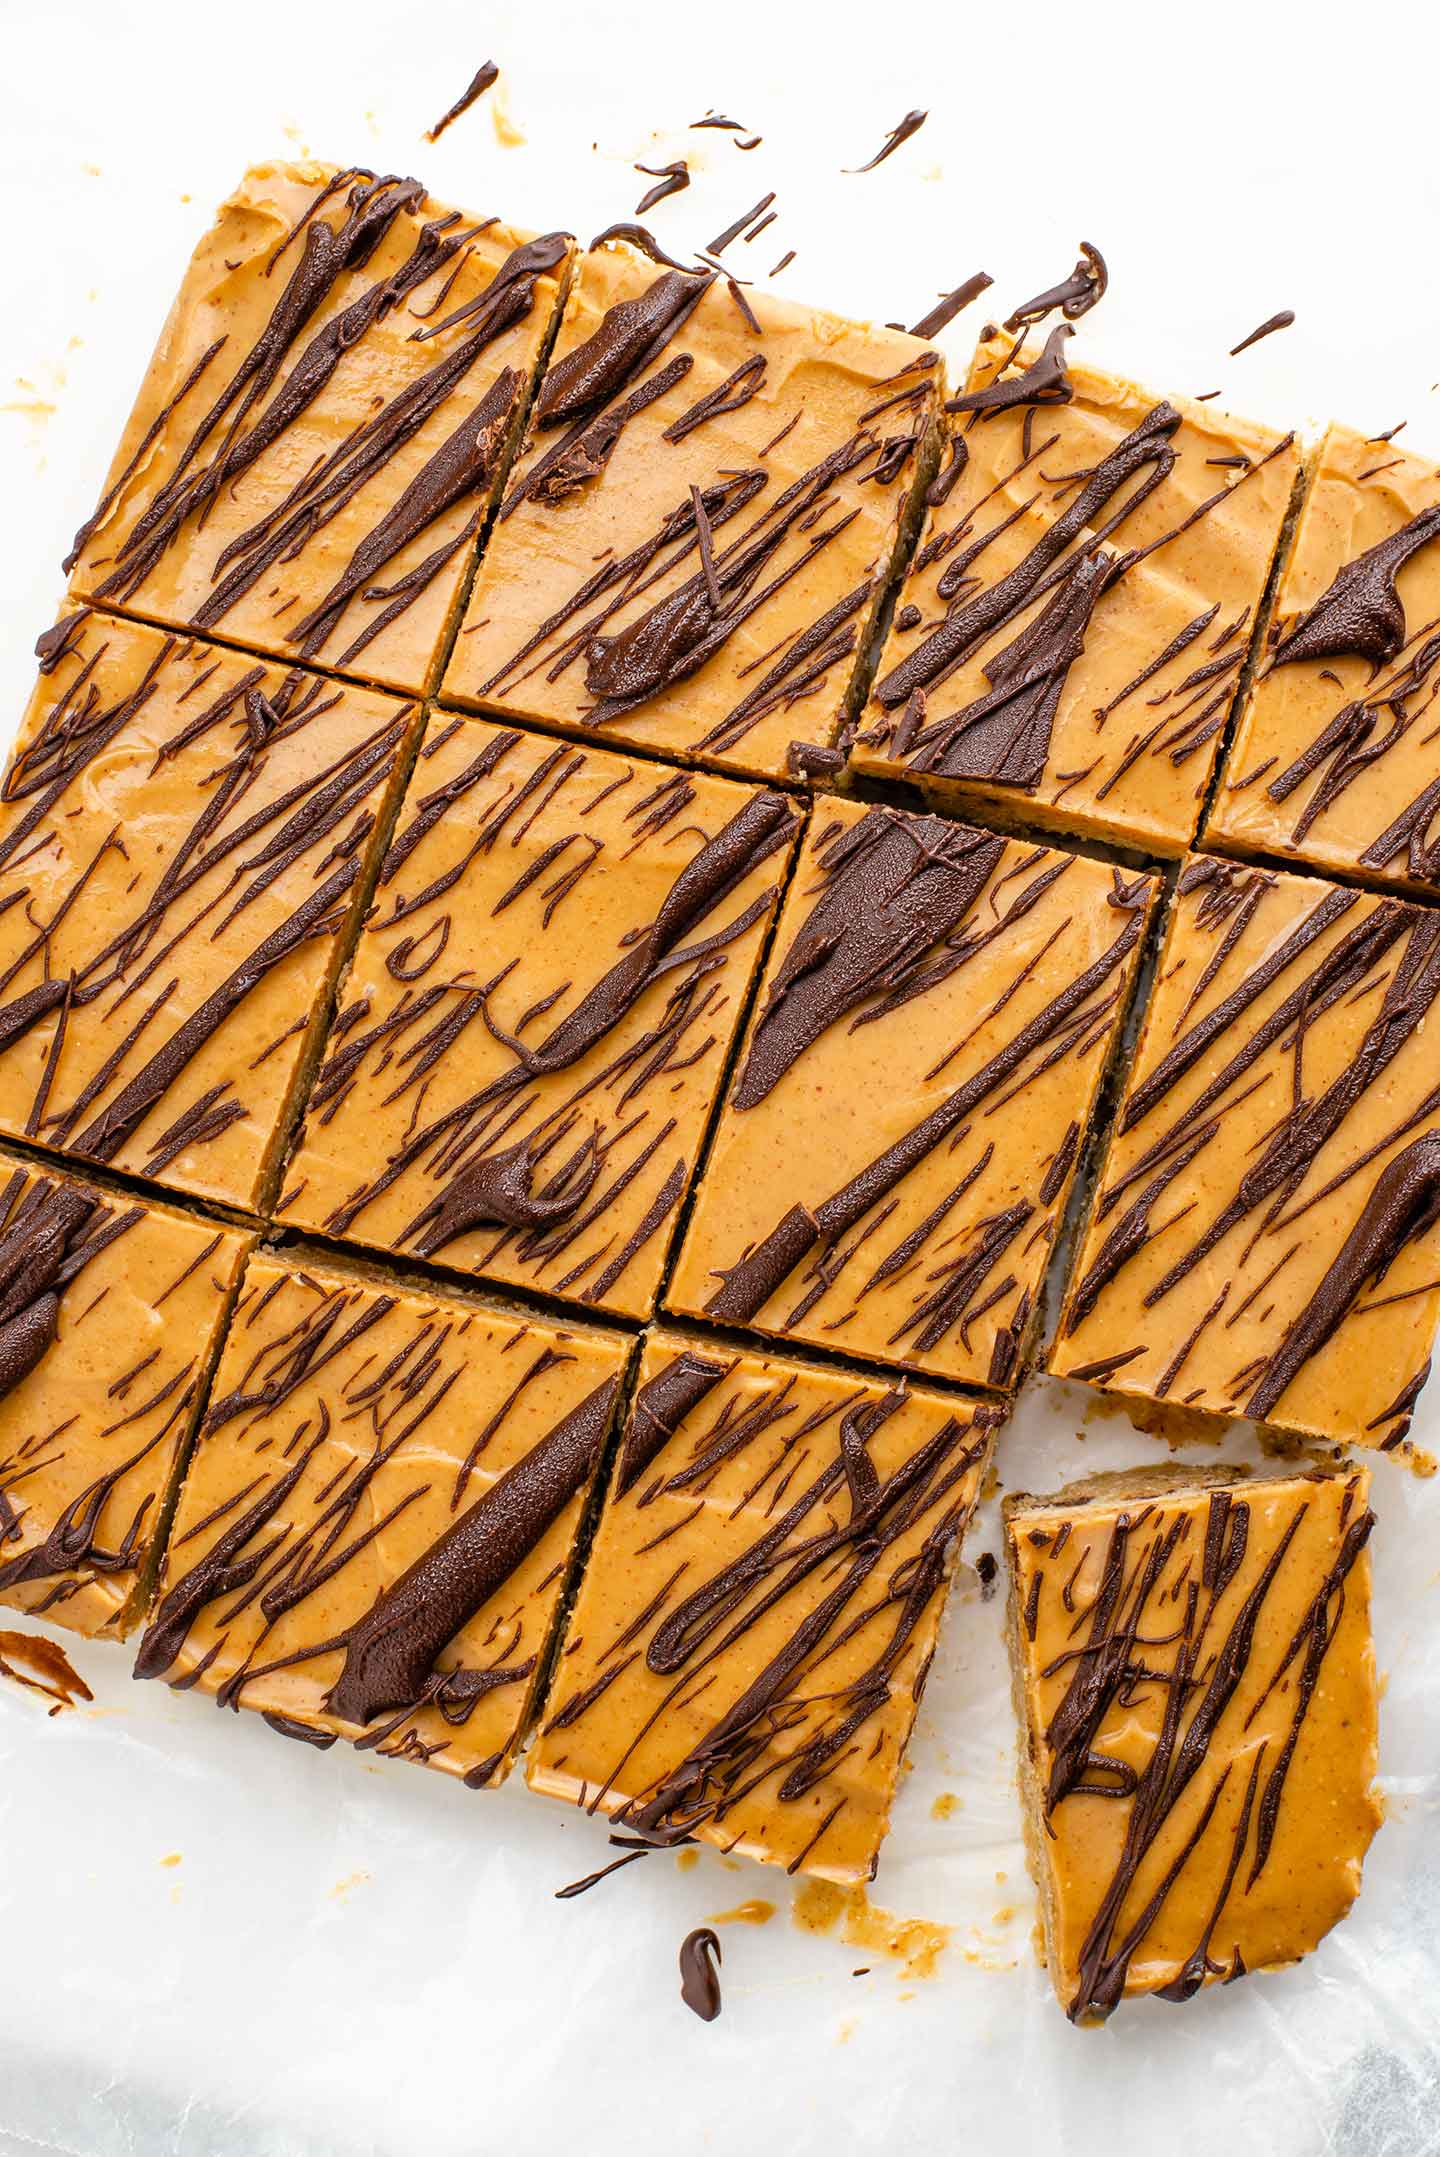 Top down view of the finished frozen  bars drizzled in dark chocolate and sliced into 12 individual bars.